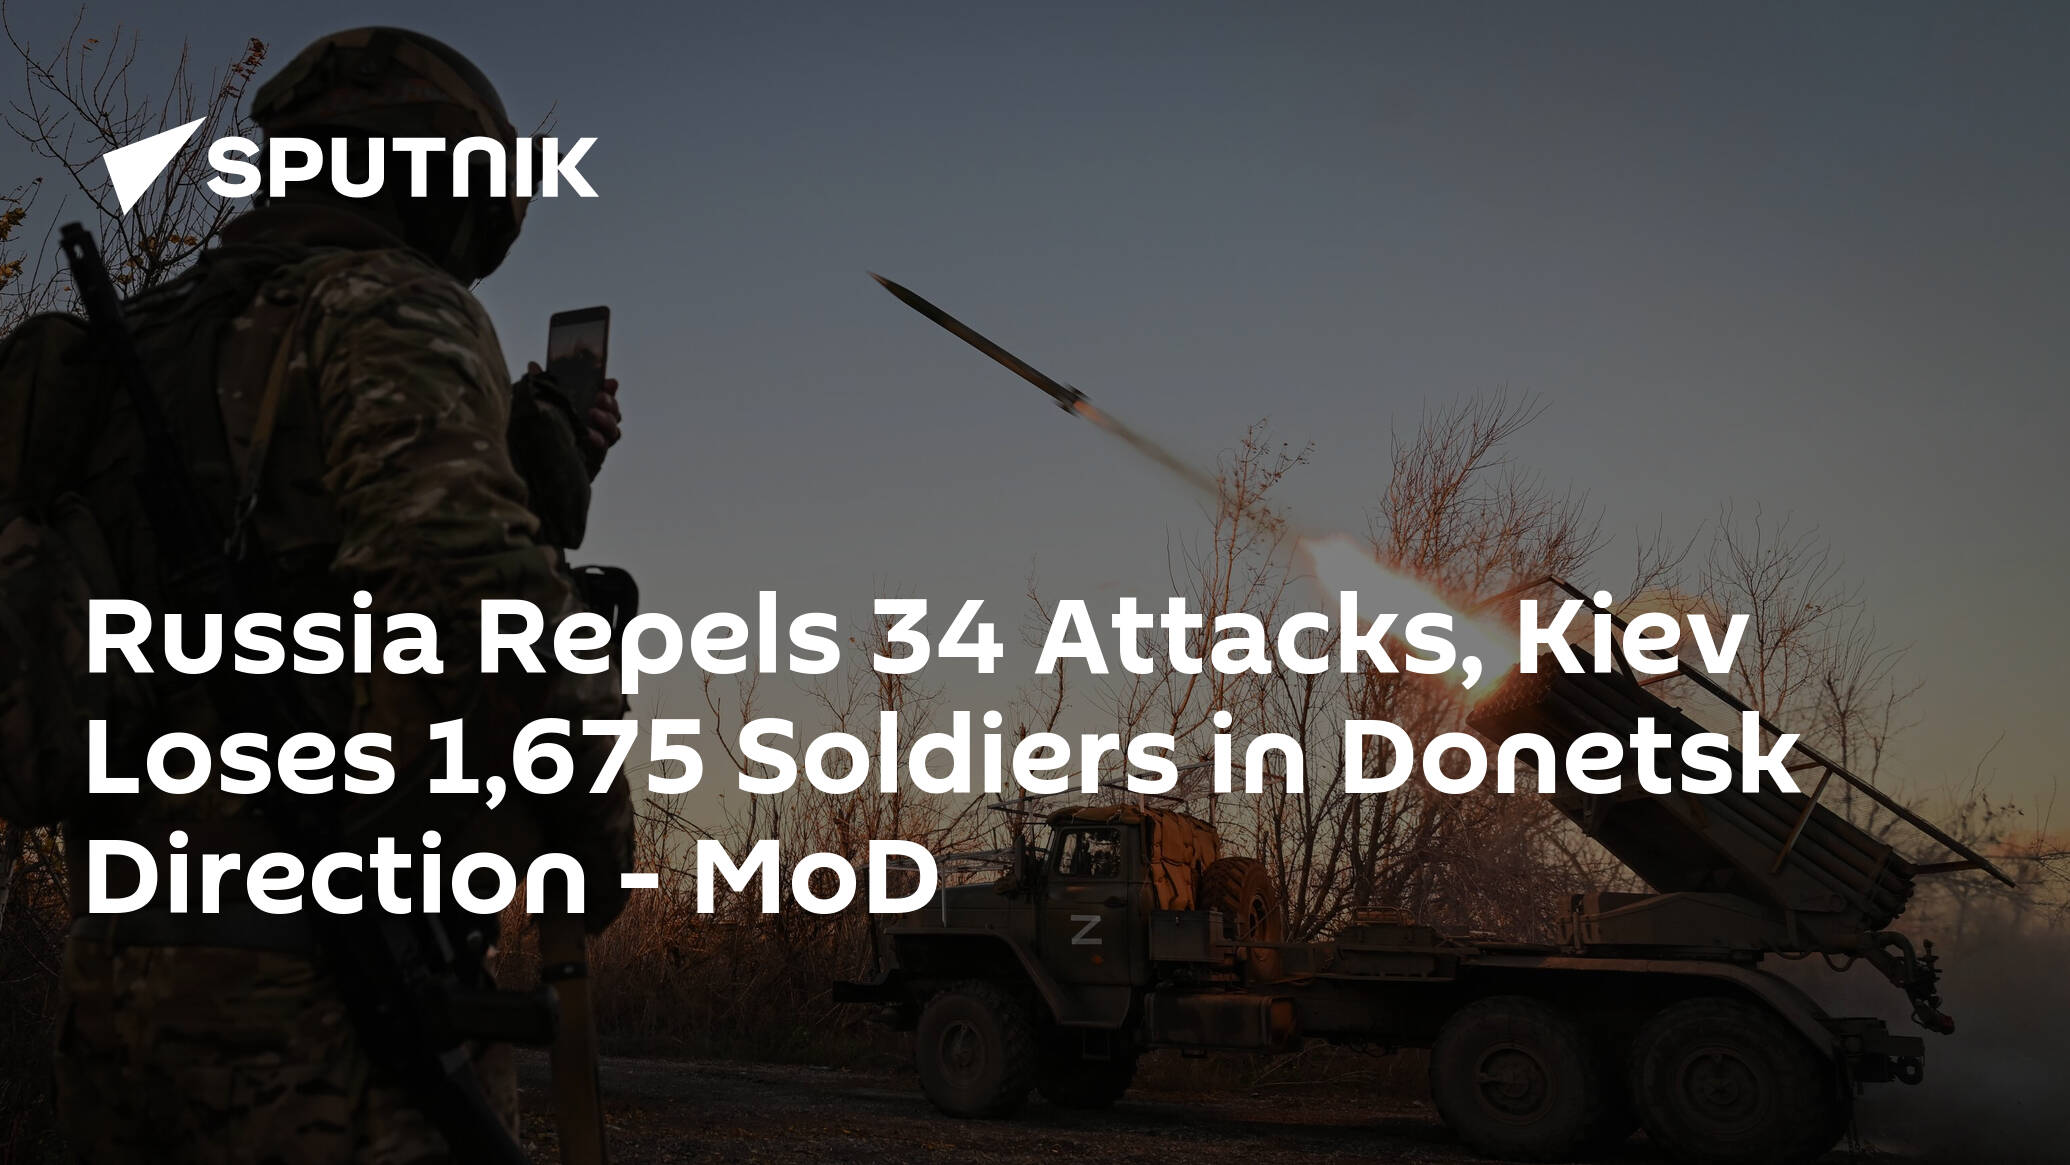 Russia Repels 34 Attacks, Kiev Loses 1,675 Soldiers in Donetsk Direction – MoD